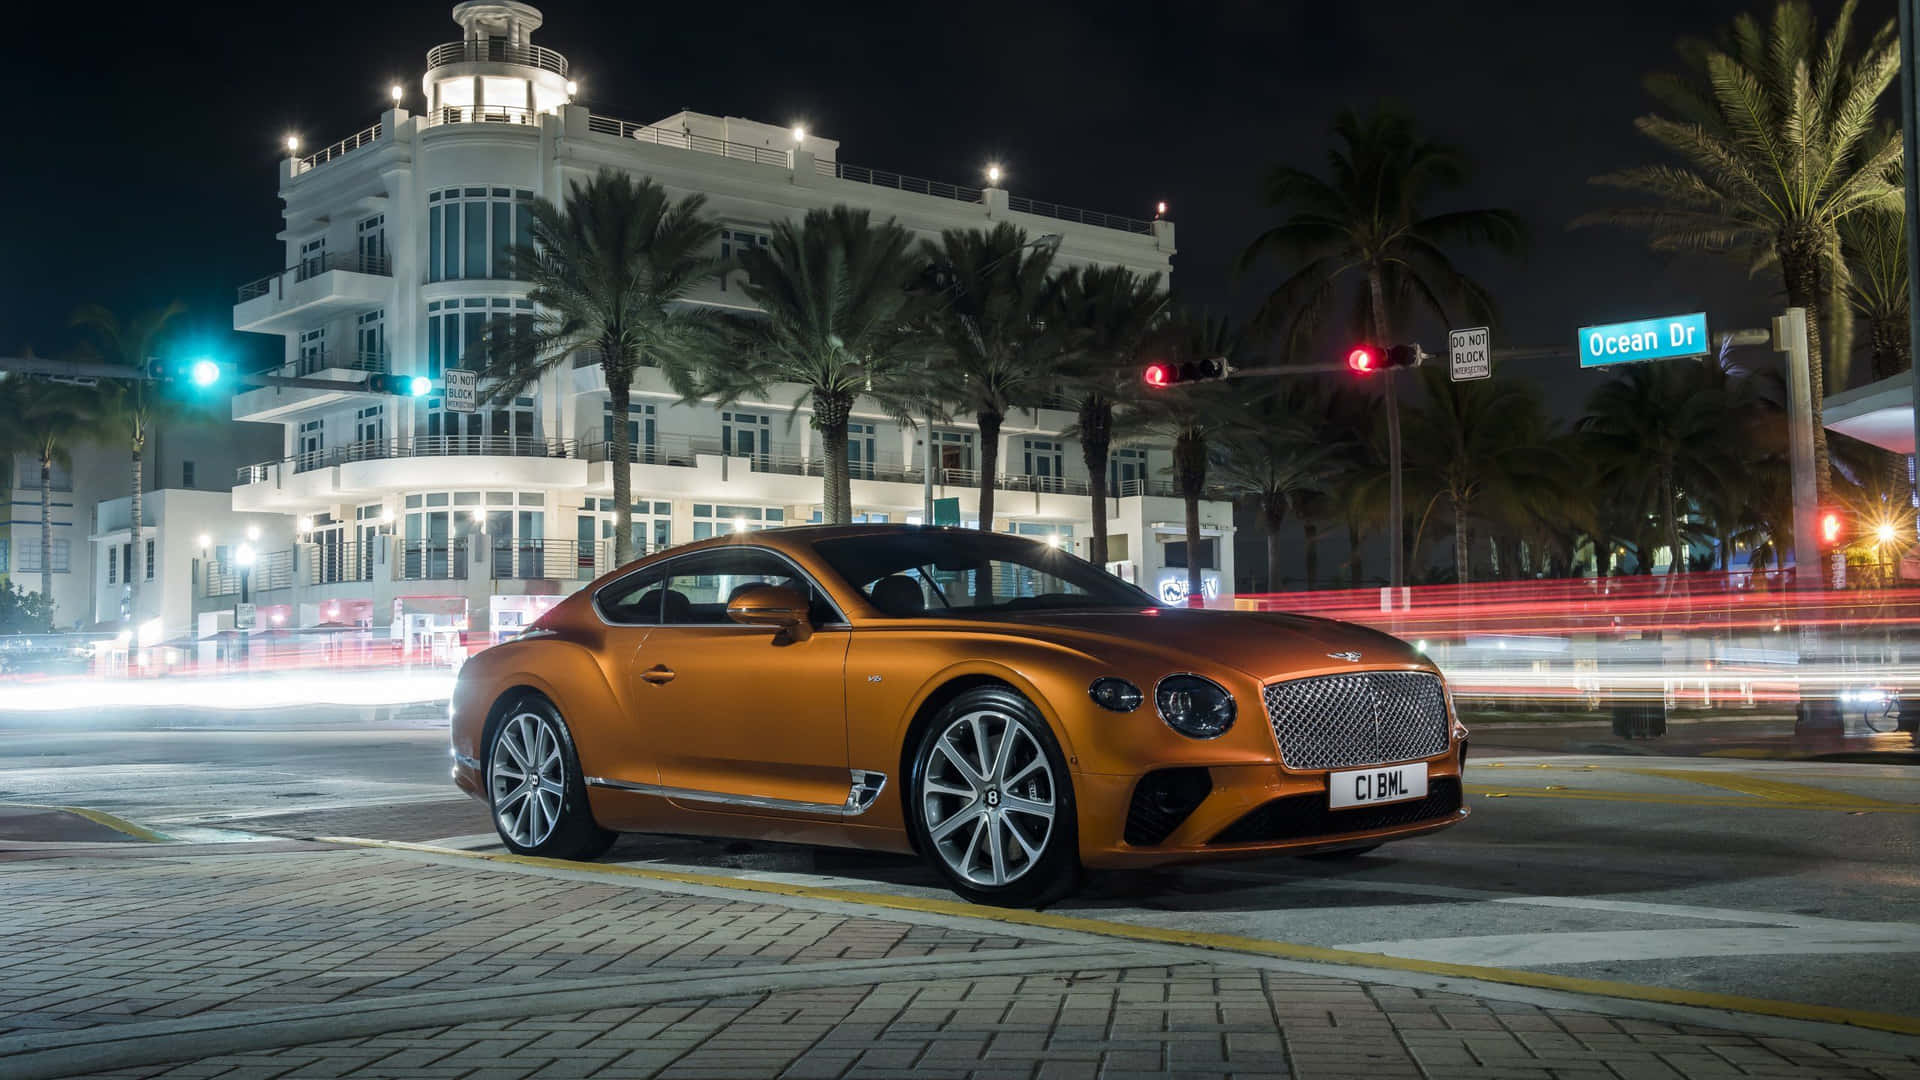 "Experience Luxury and Style With a Best Bentley"